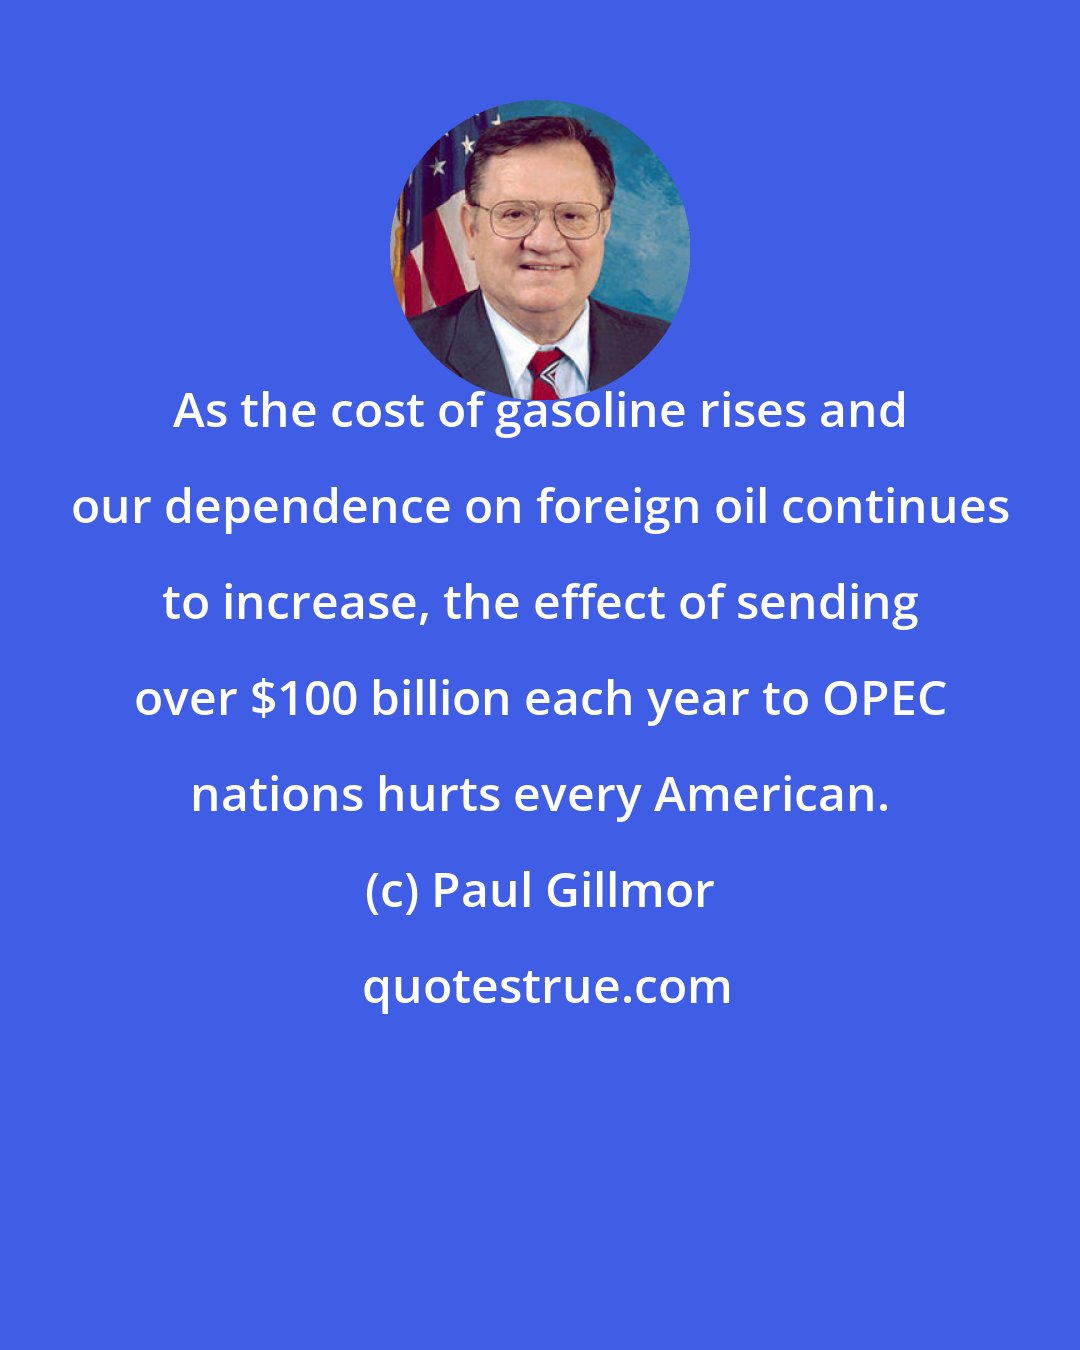 Paul Gillmor: As the cost of gasoline rises and our dependence on foreign oil continues to increase, the effect of sending over $100 billion each year to OPEC nations hurts every American.